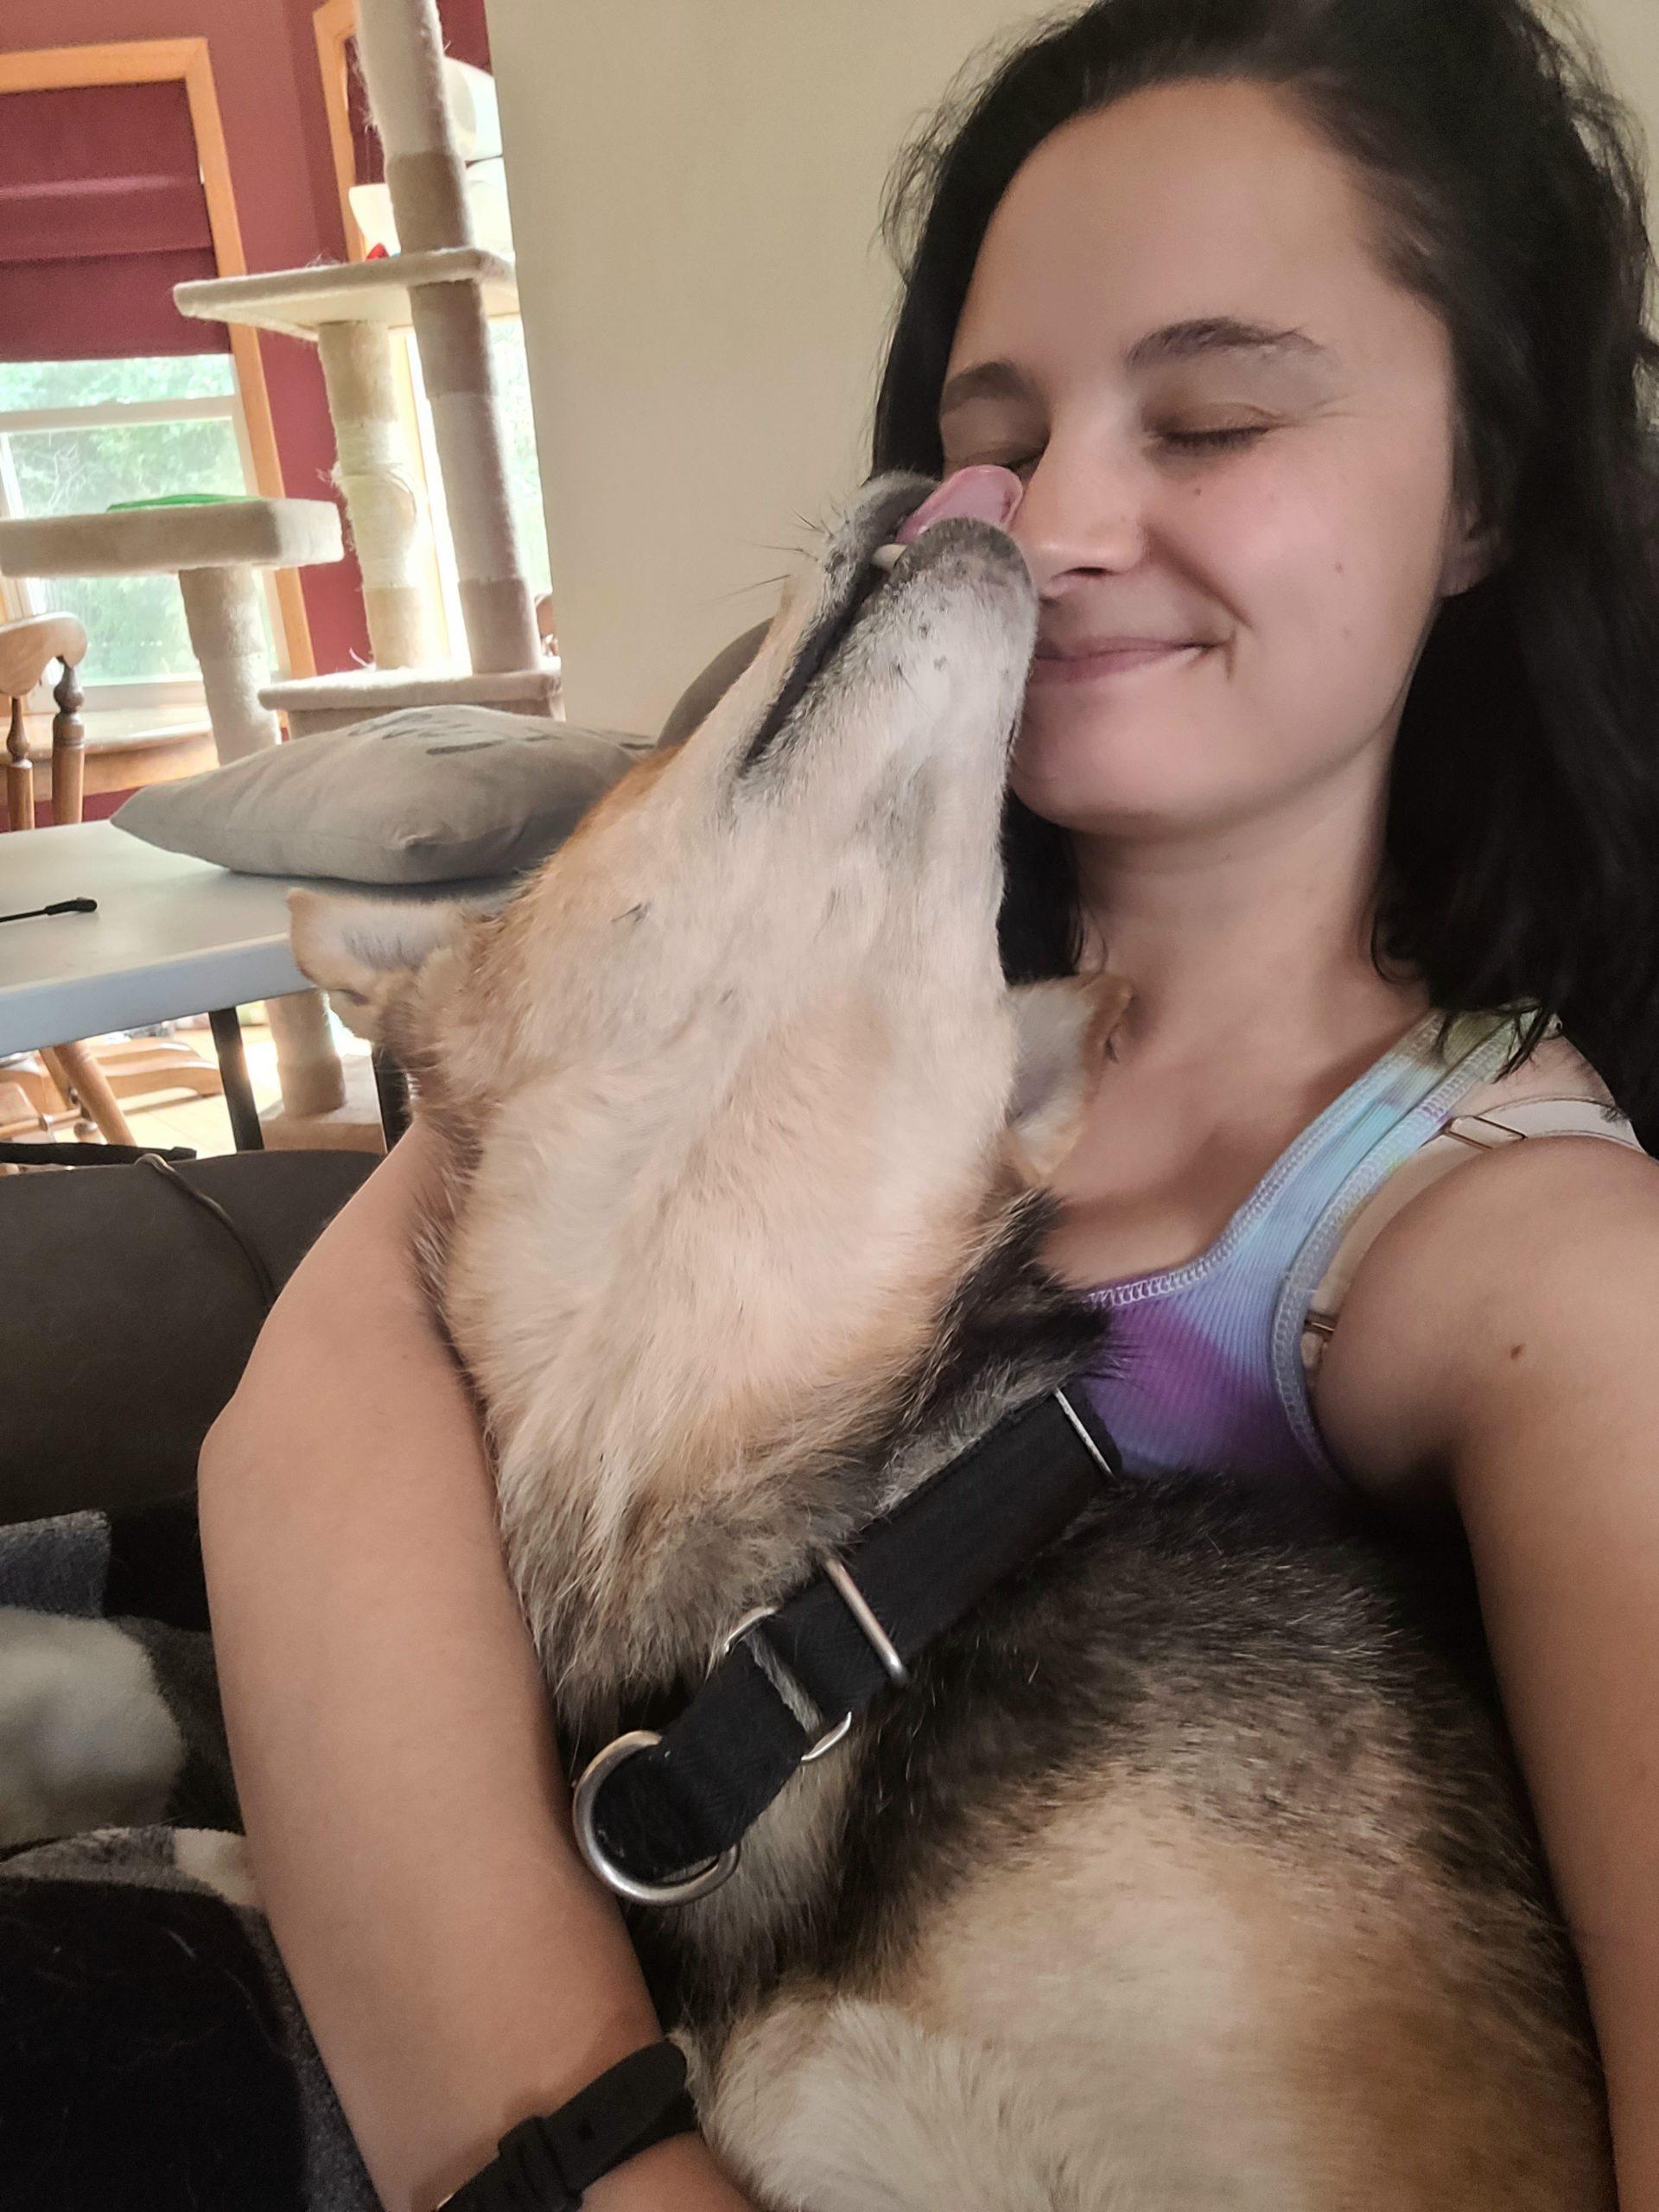 A woman takes a selfie while a big dog licks her nose.